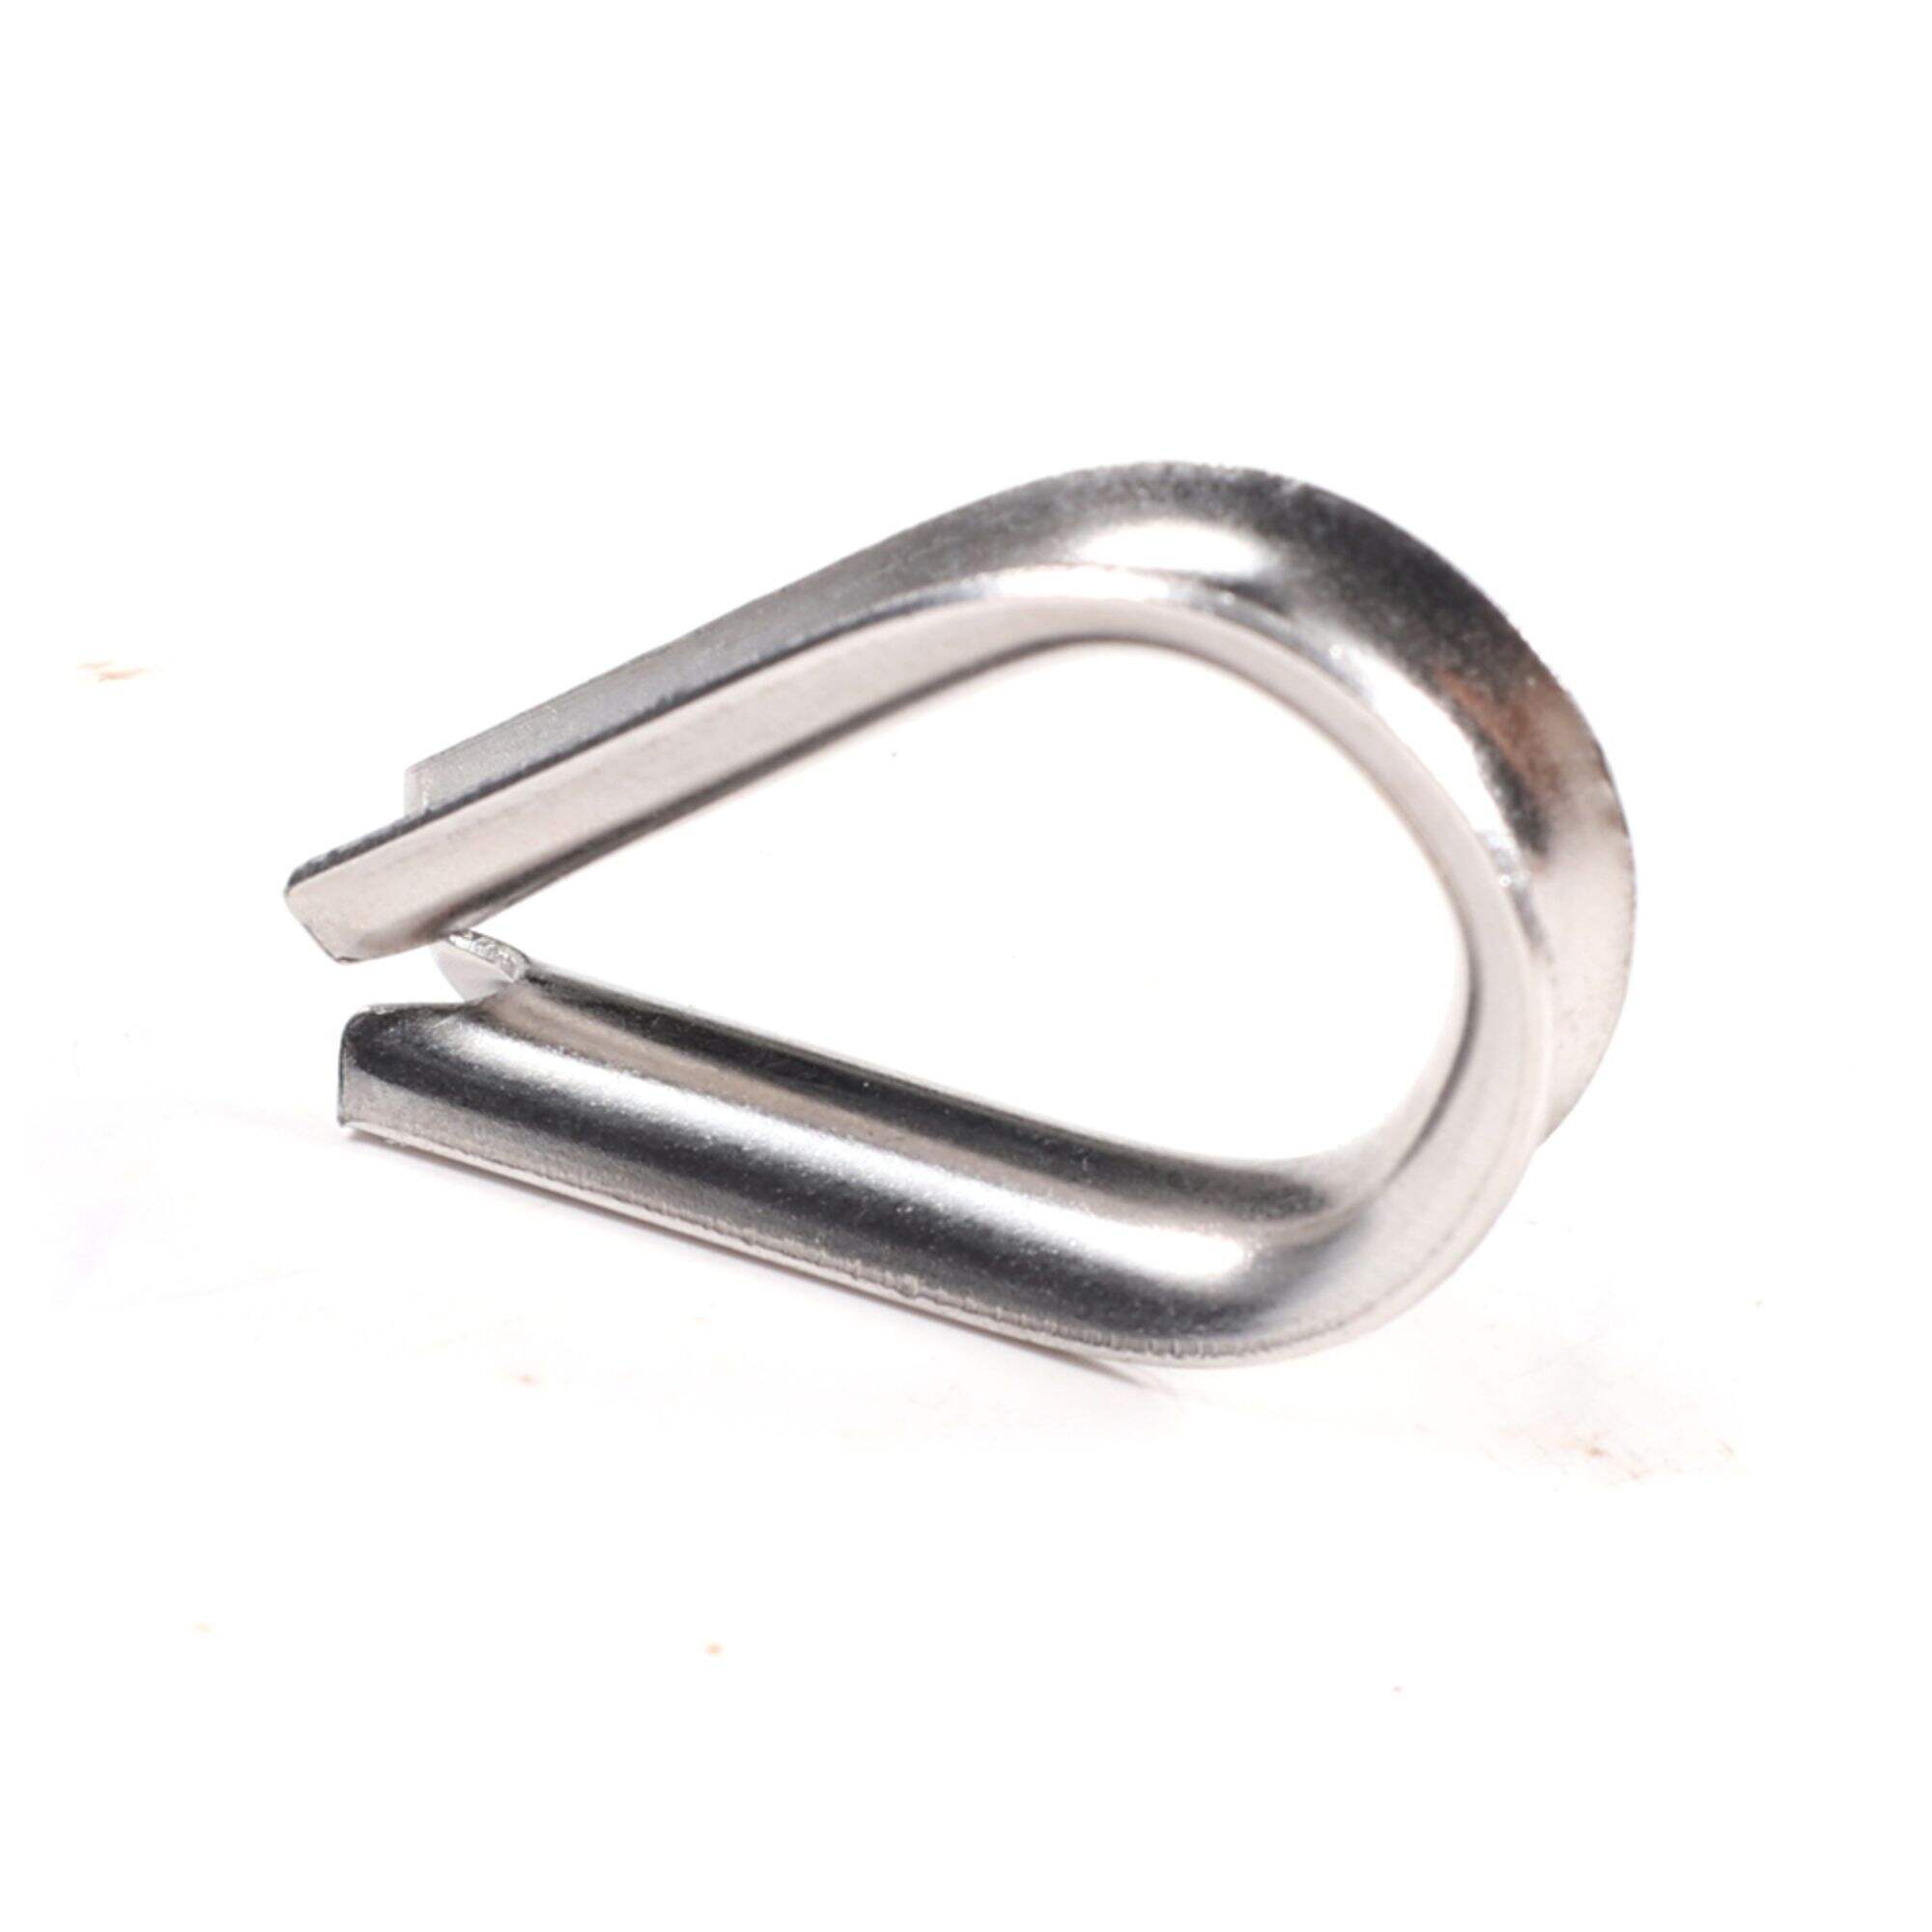 Rigging Hardware M2-M26 DIN6899 304 Stainless Steel 10mm Wire Rope Thimble for Ropes